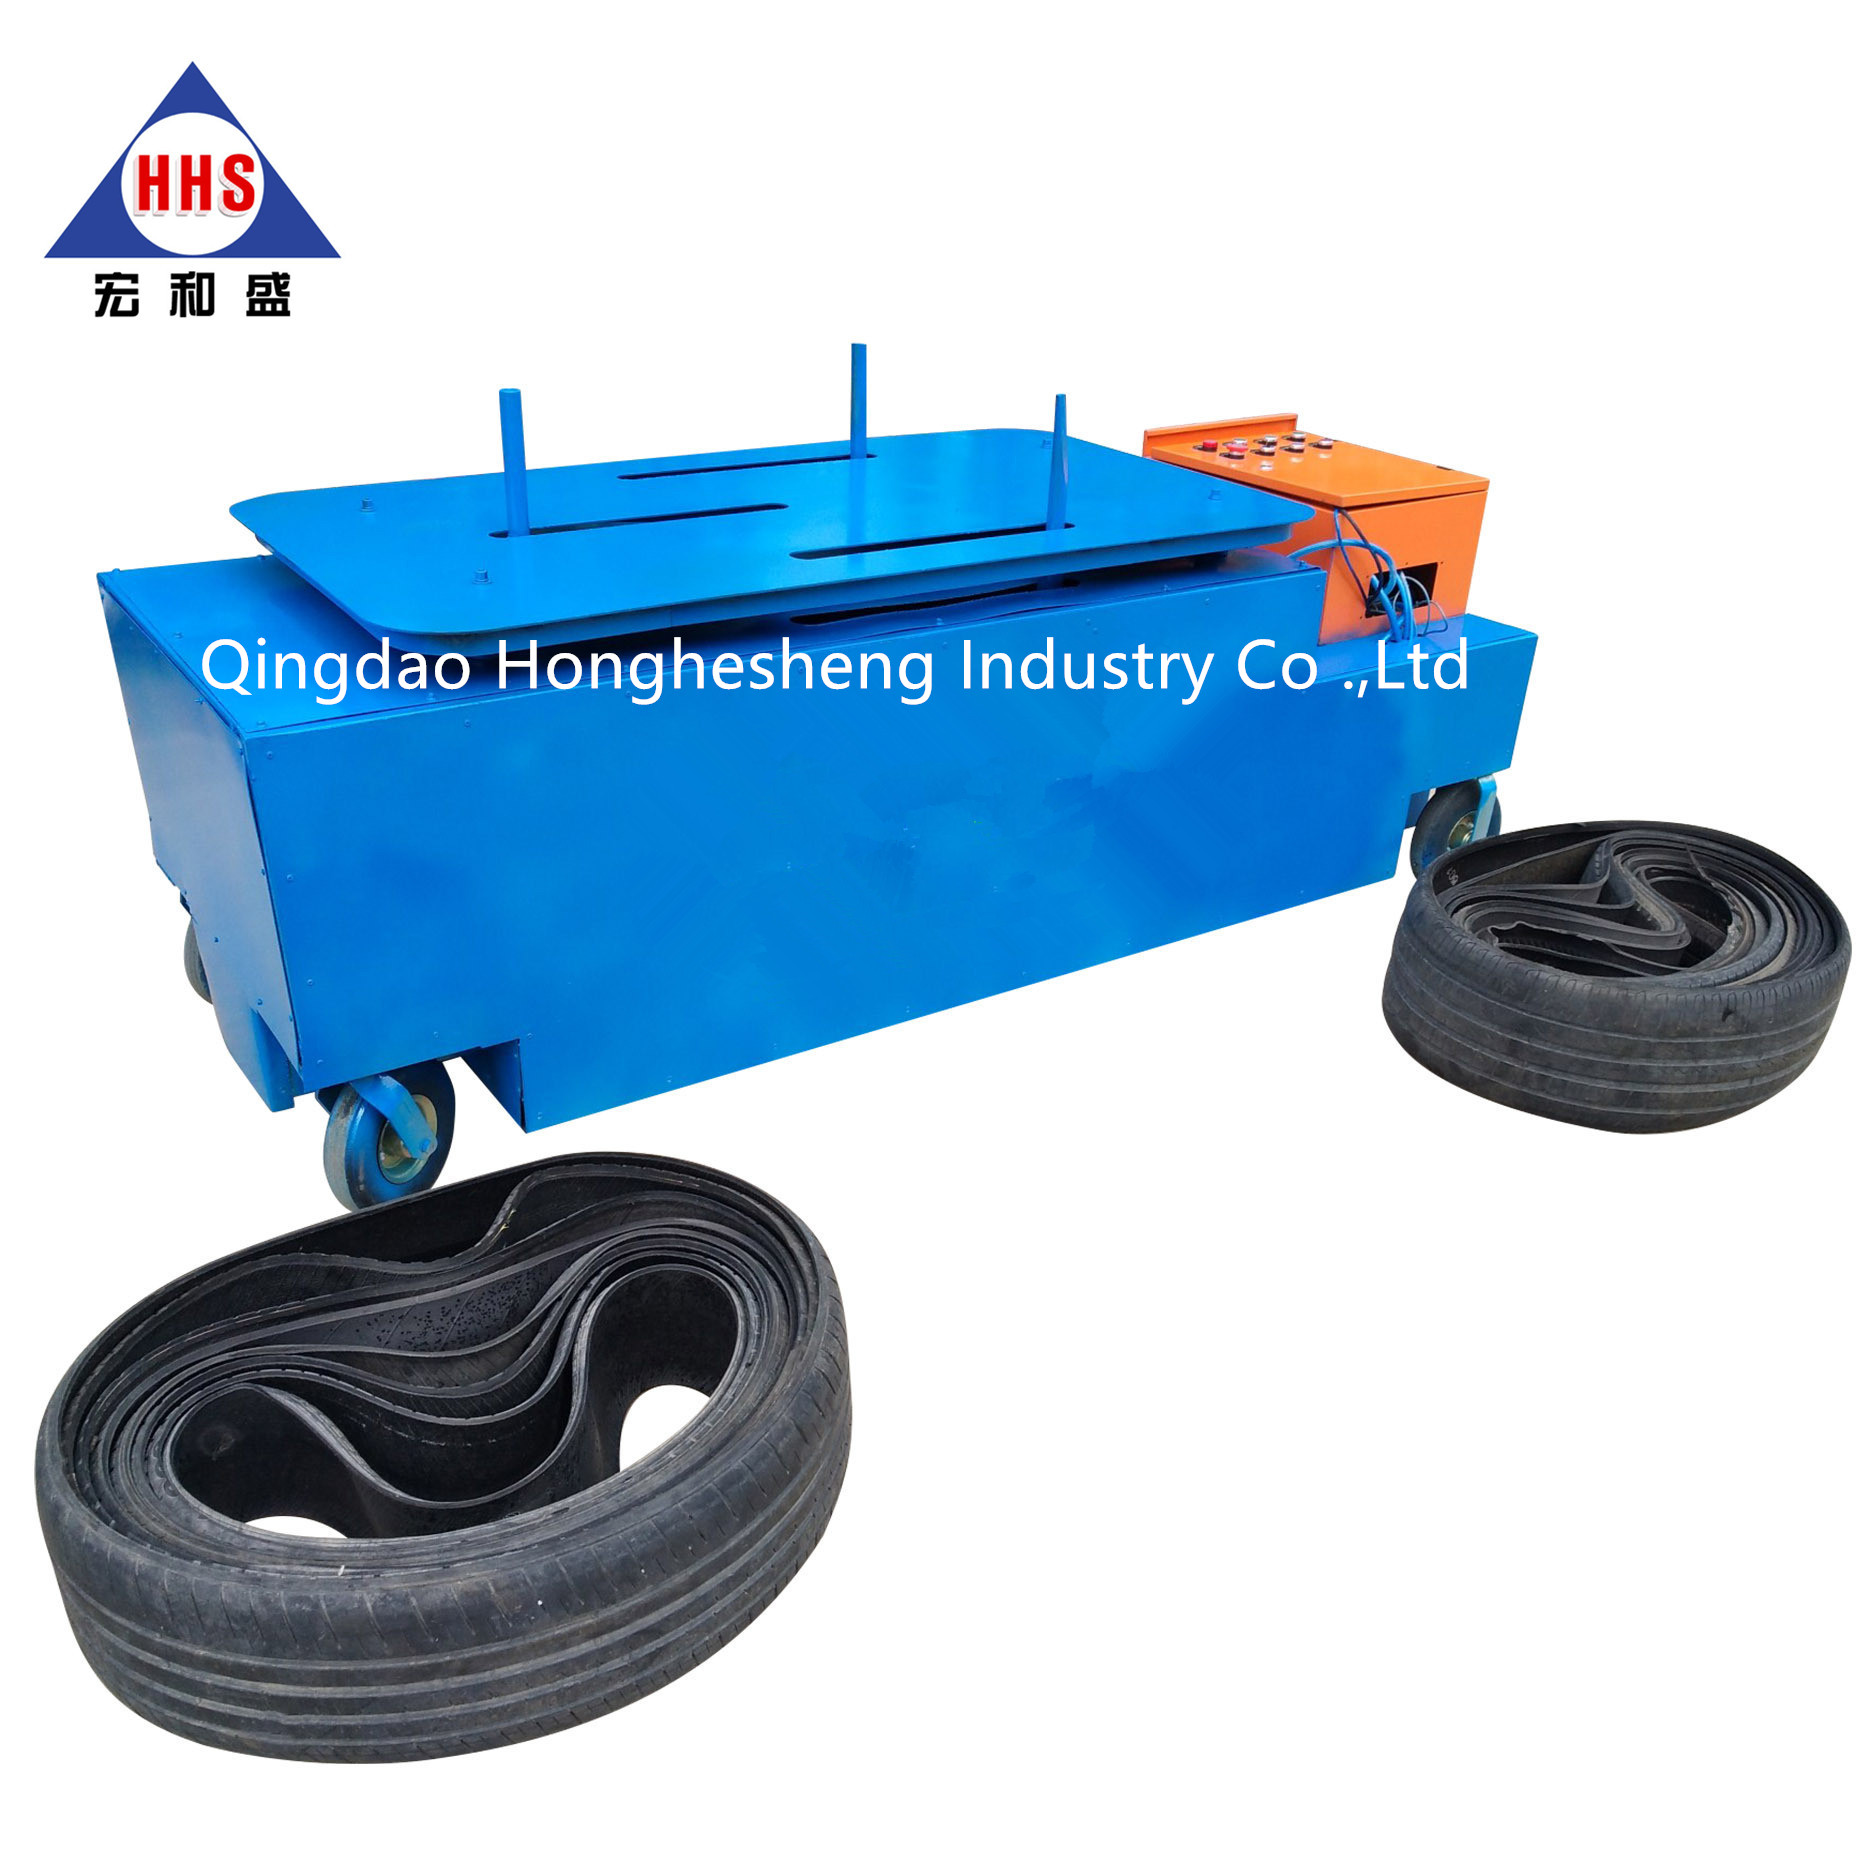 Pneumatic Tyre Packing Machine For Whole Tyres and Waste Tire Tread